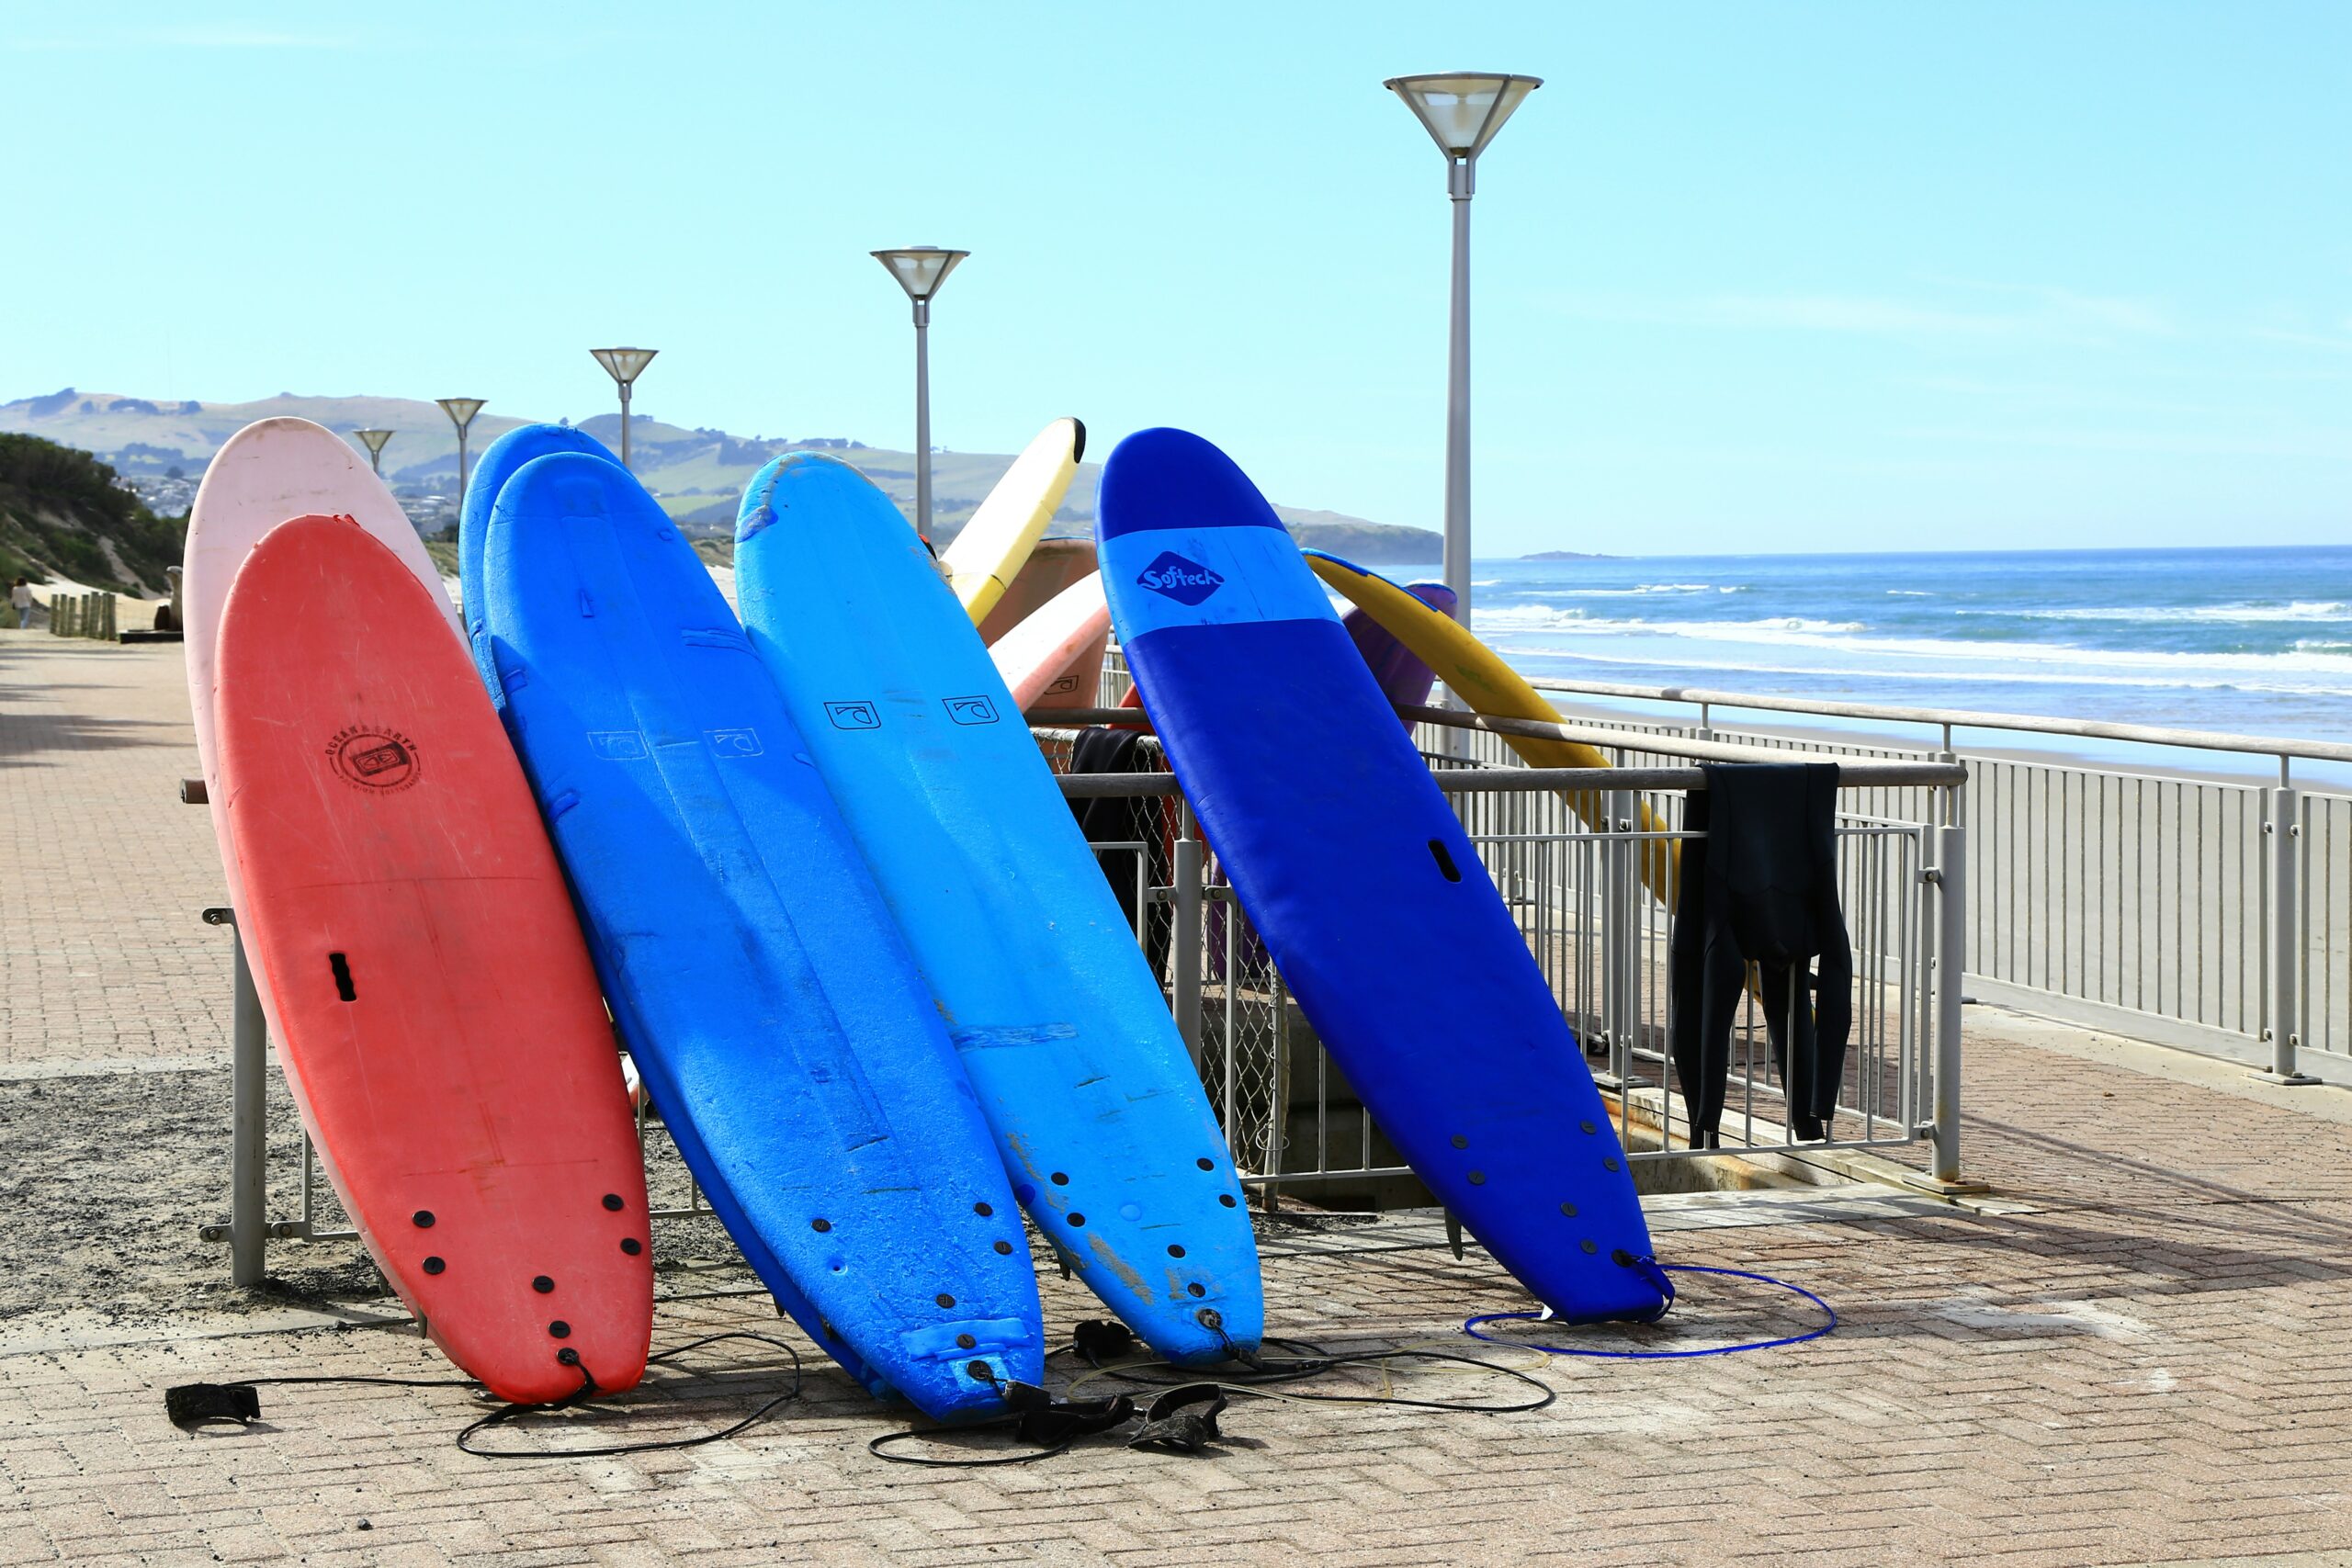 a detailed comparison of the materials commonly used in crafting surfing boards